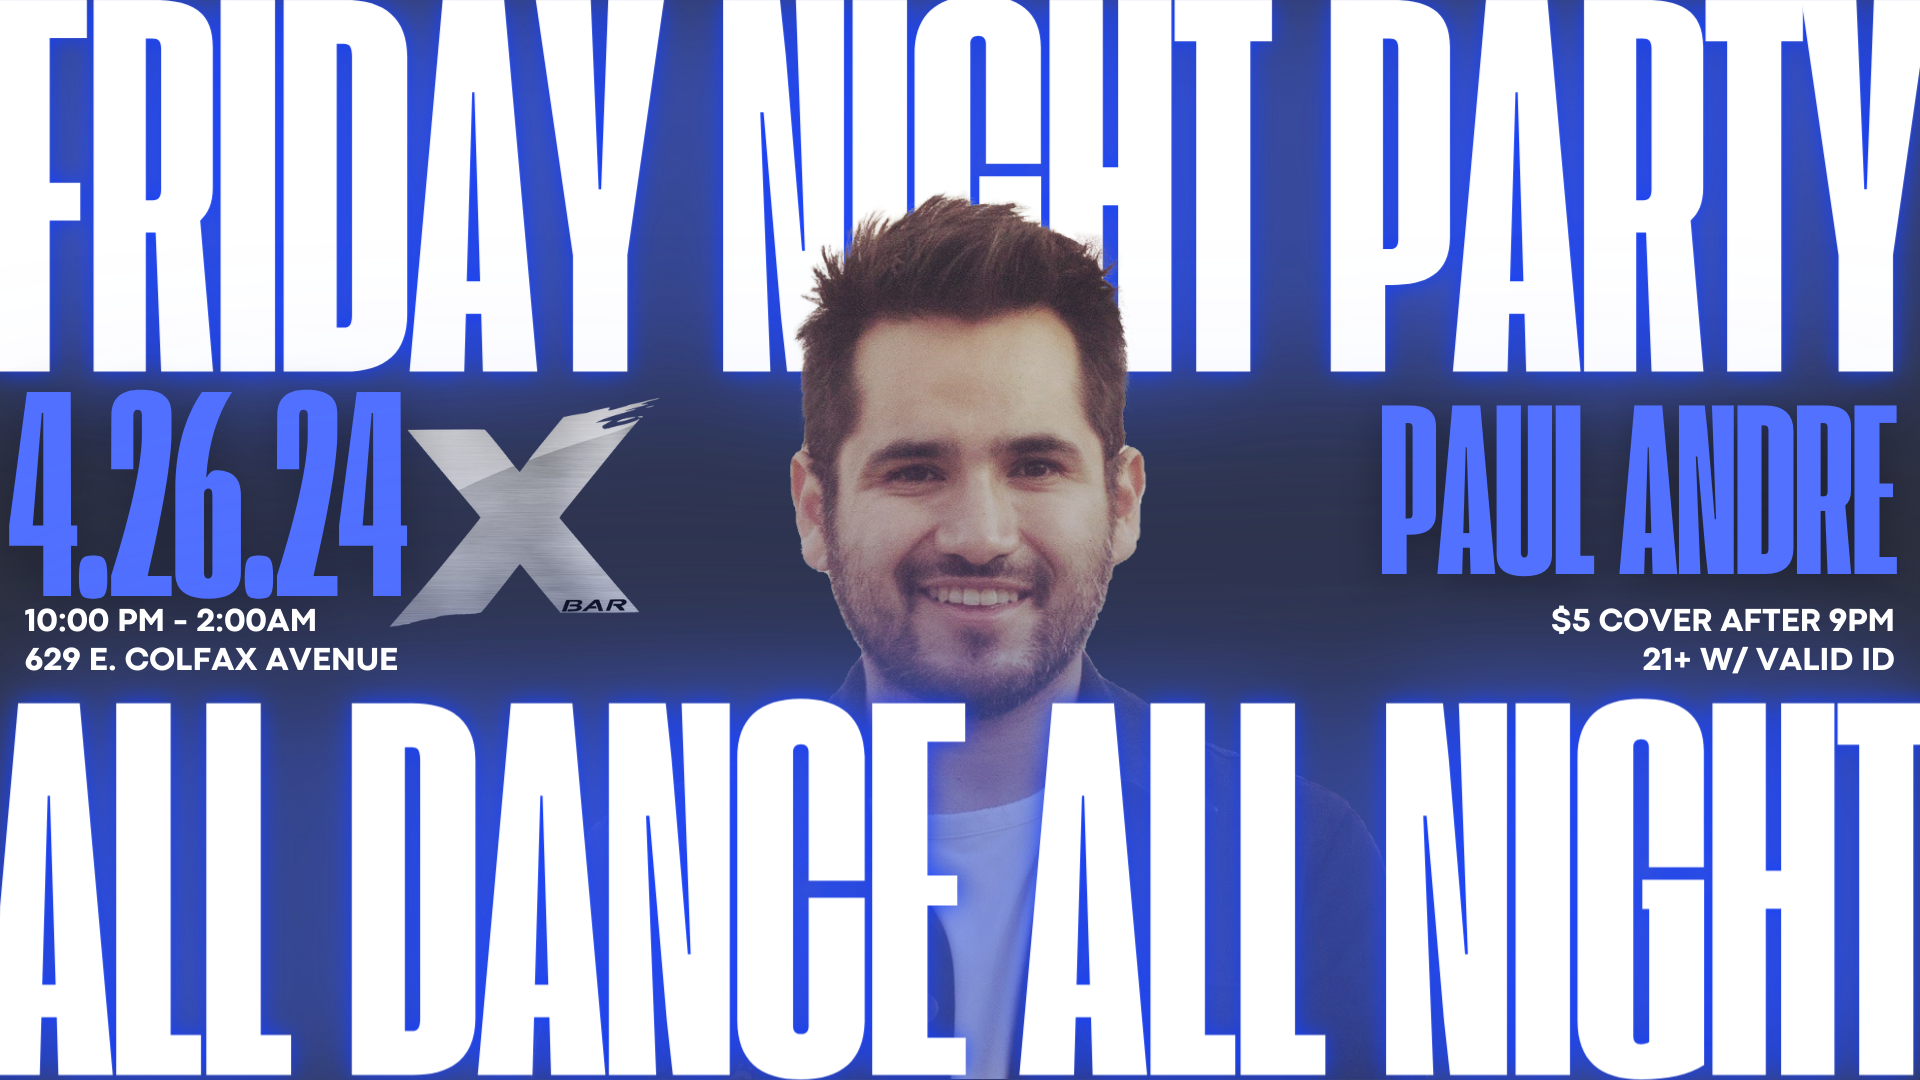 _friday night party - paul andre - banner.png